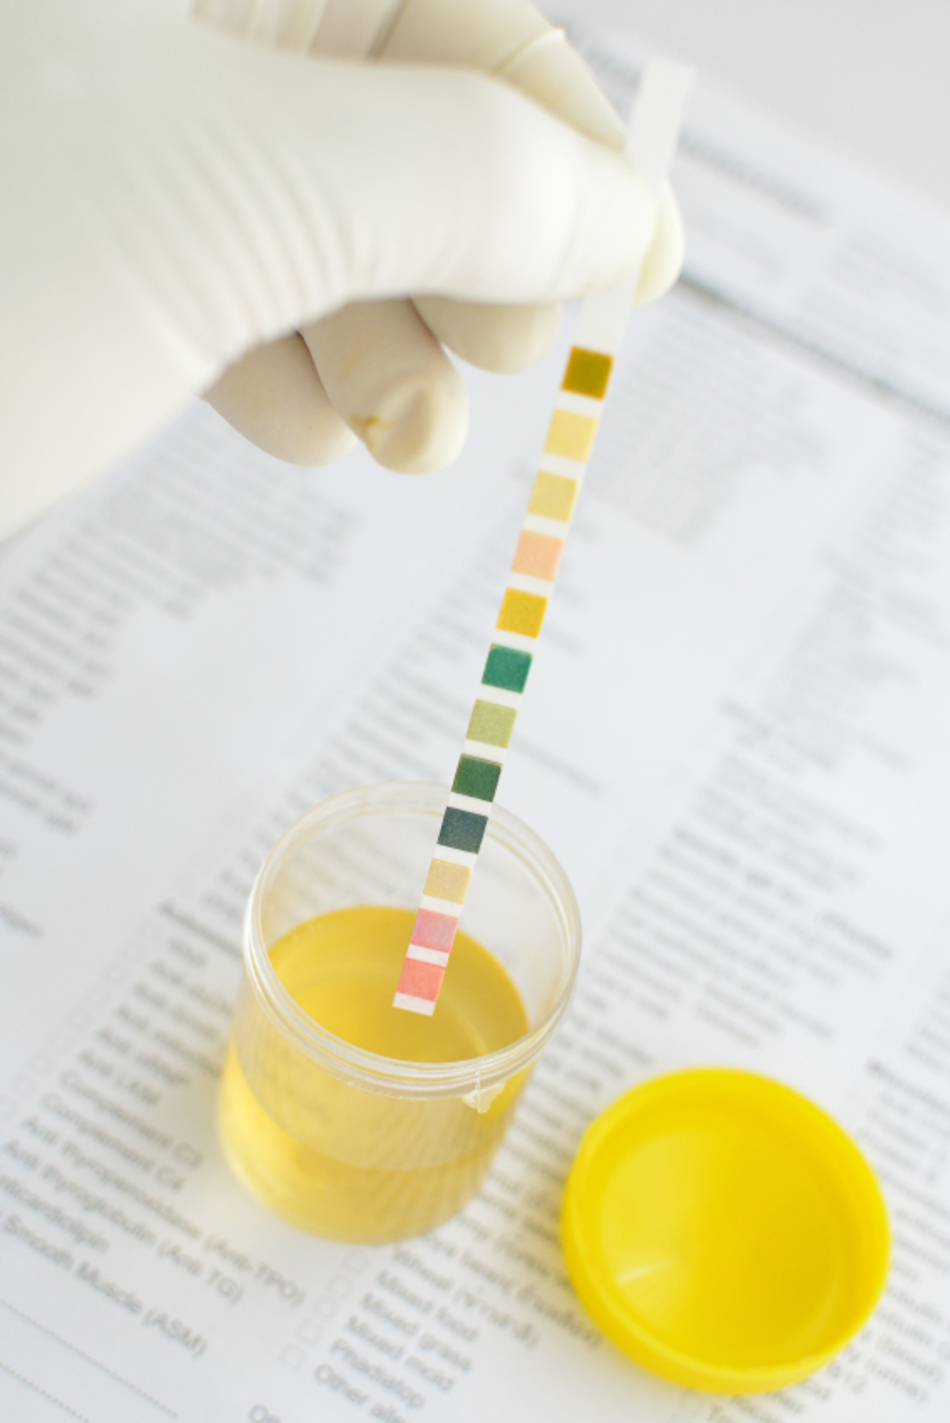 Blood in the Urine - Should You Be Concerned?